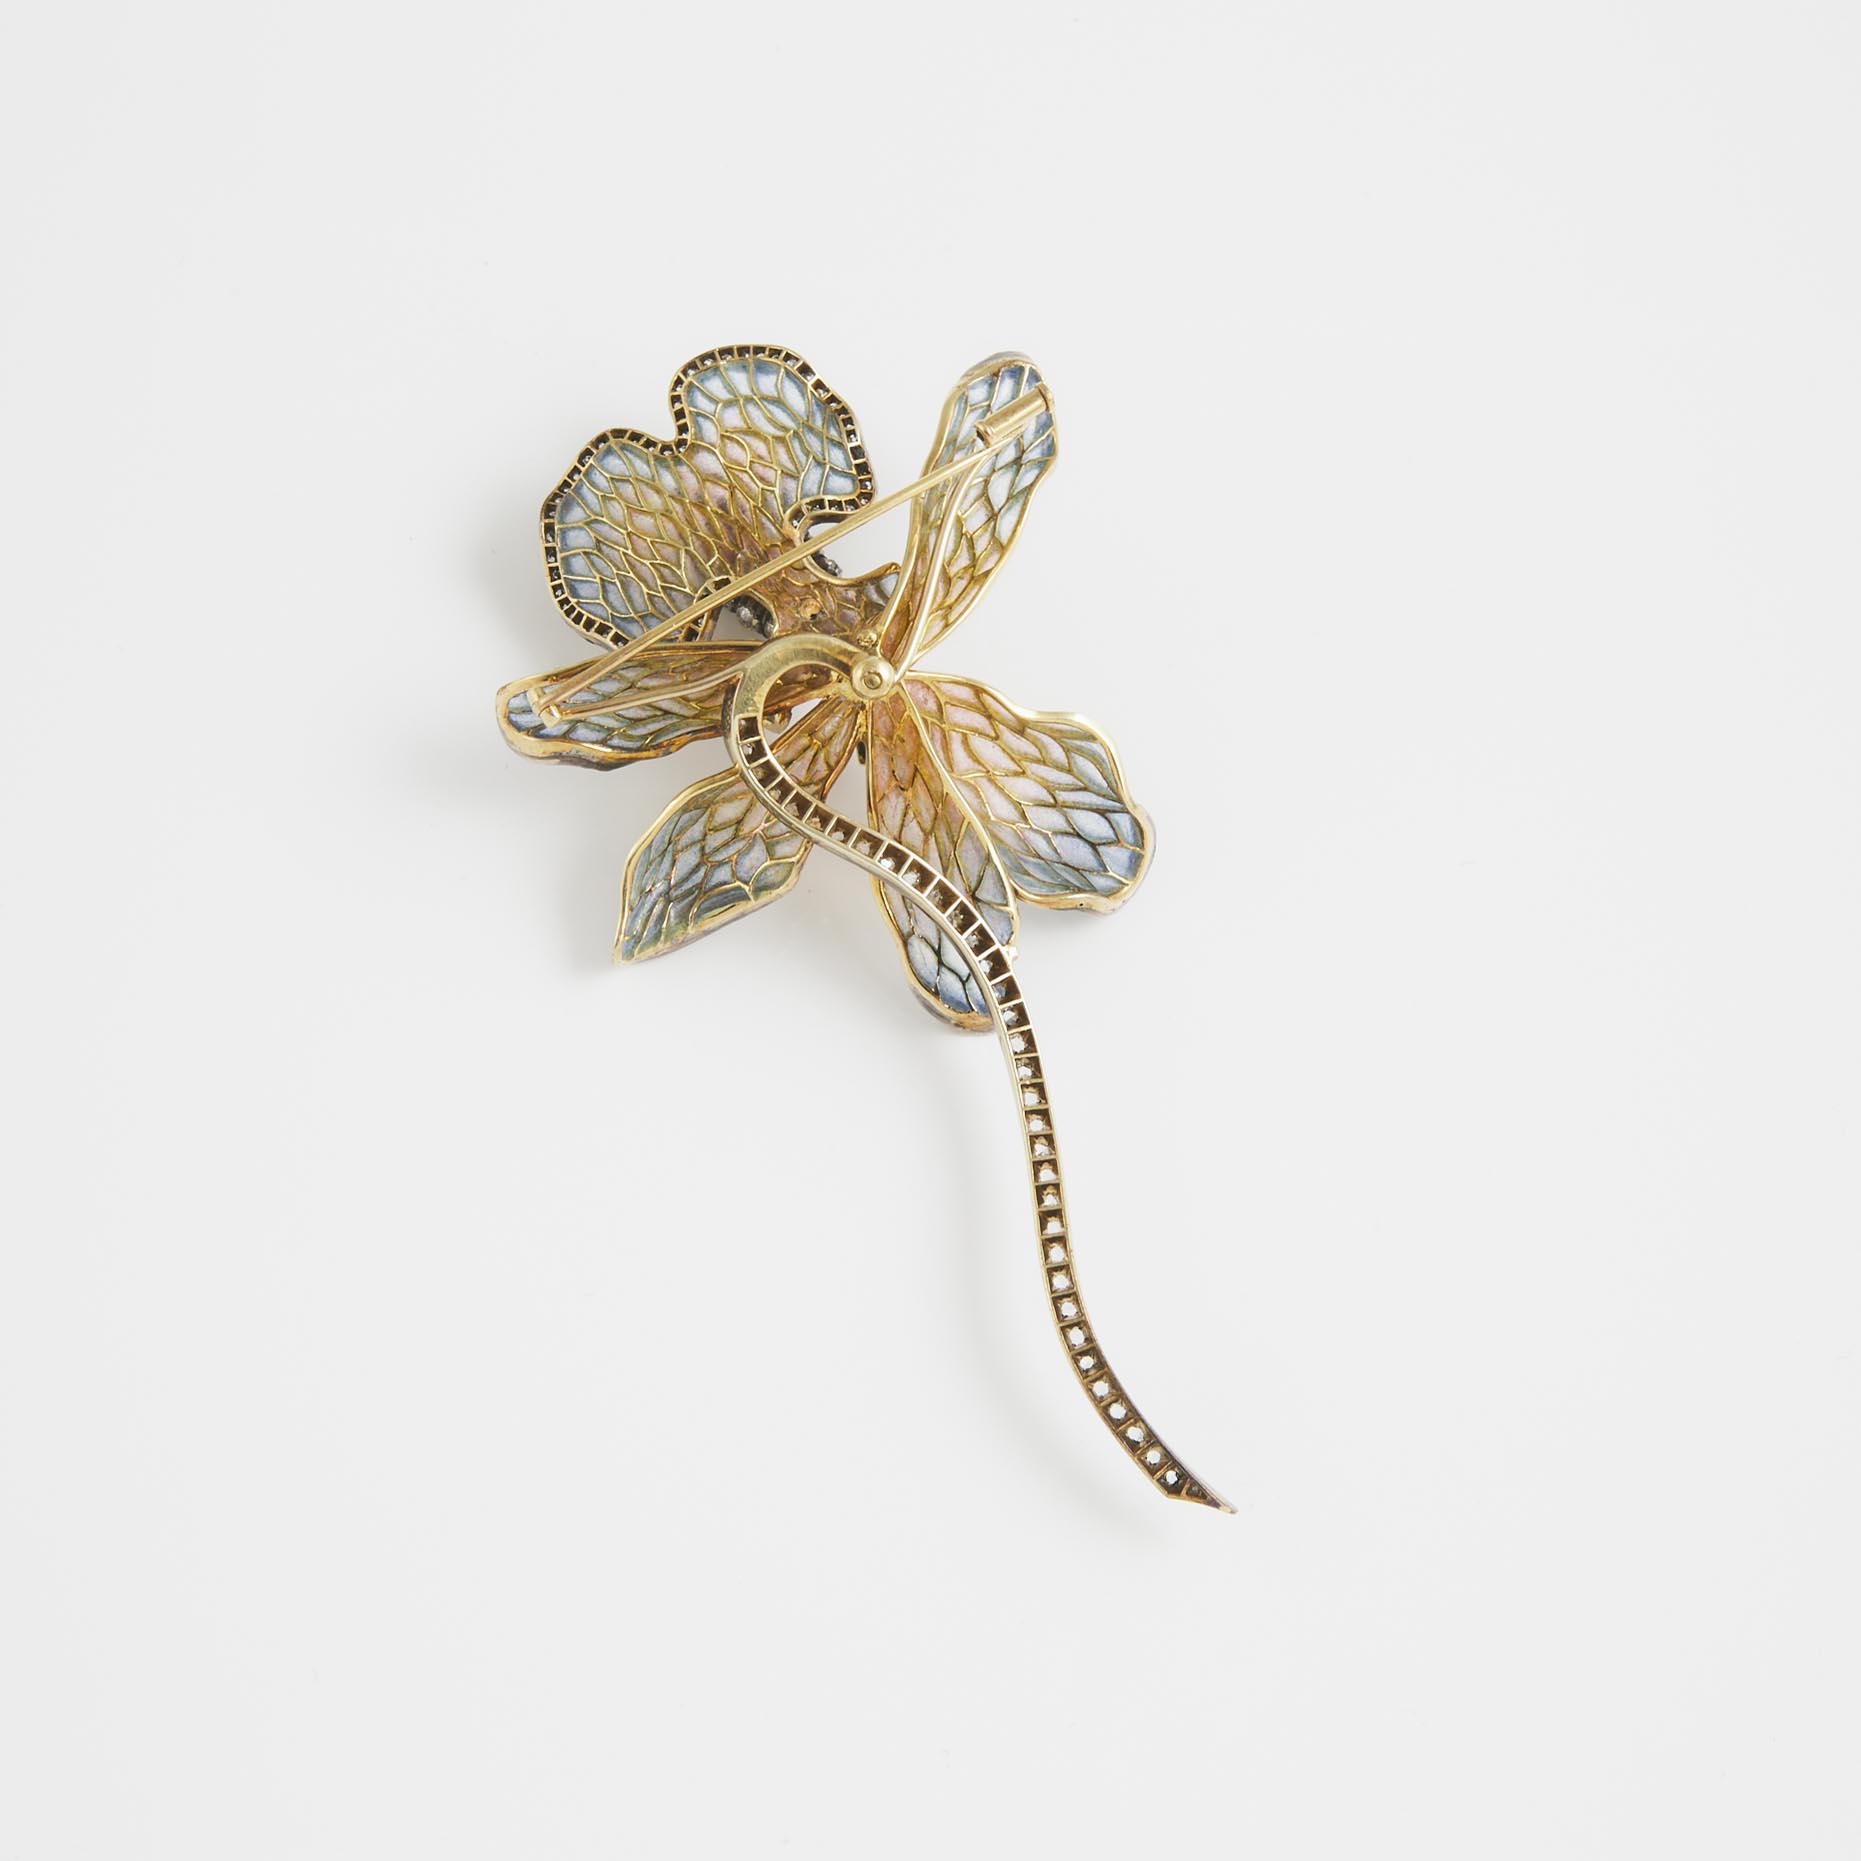 18k Yellow Gold, Silver And Enamel Brooch